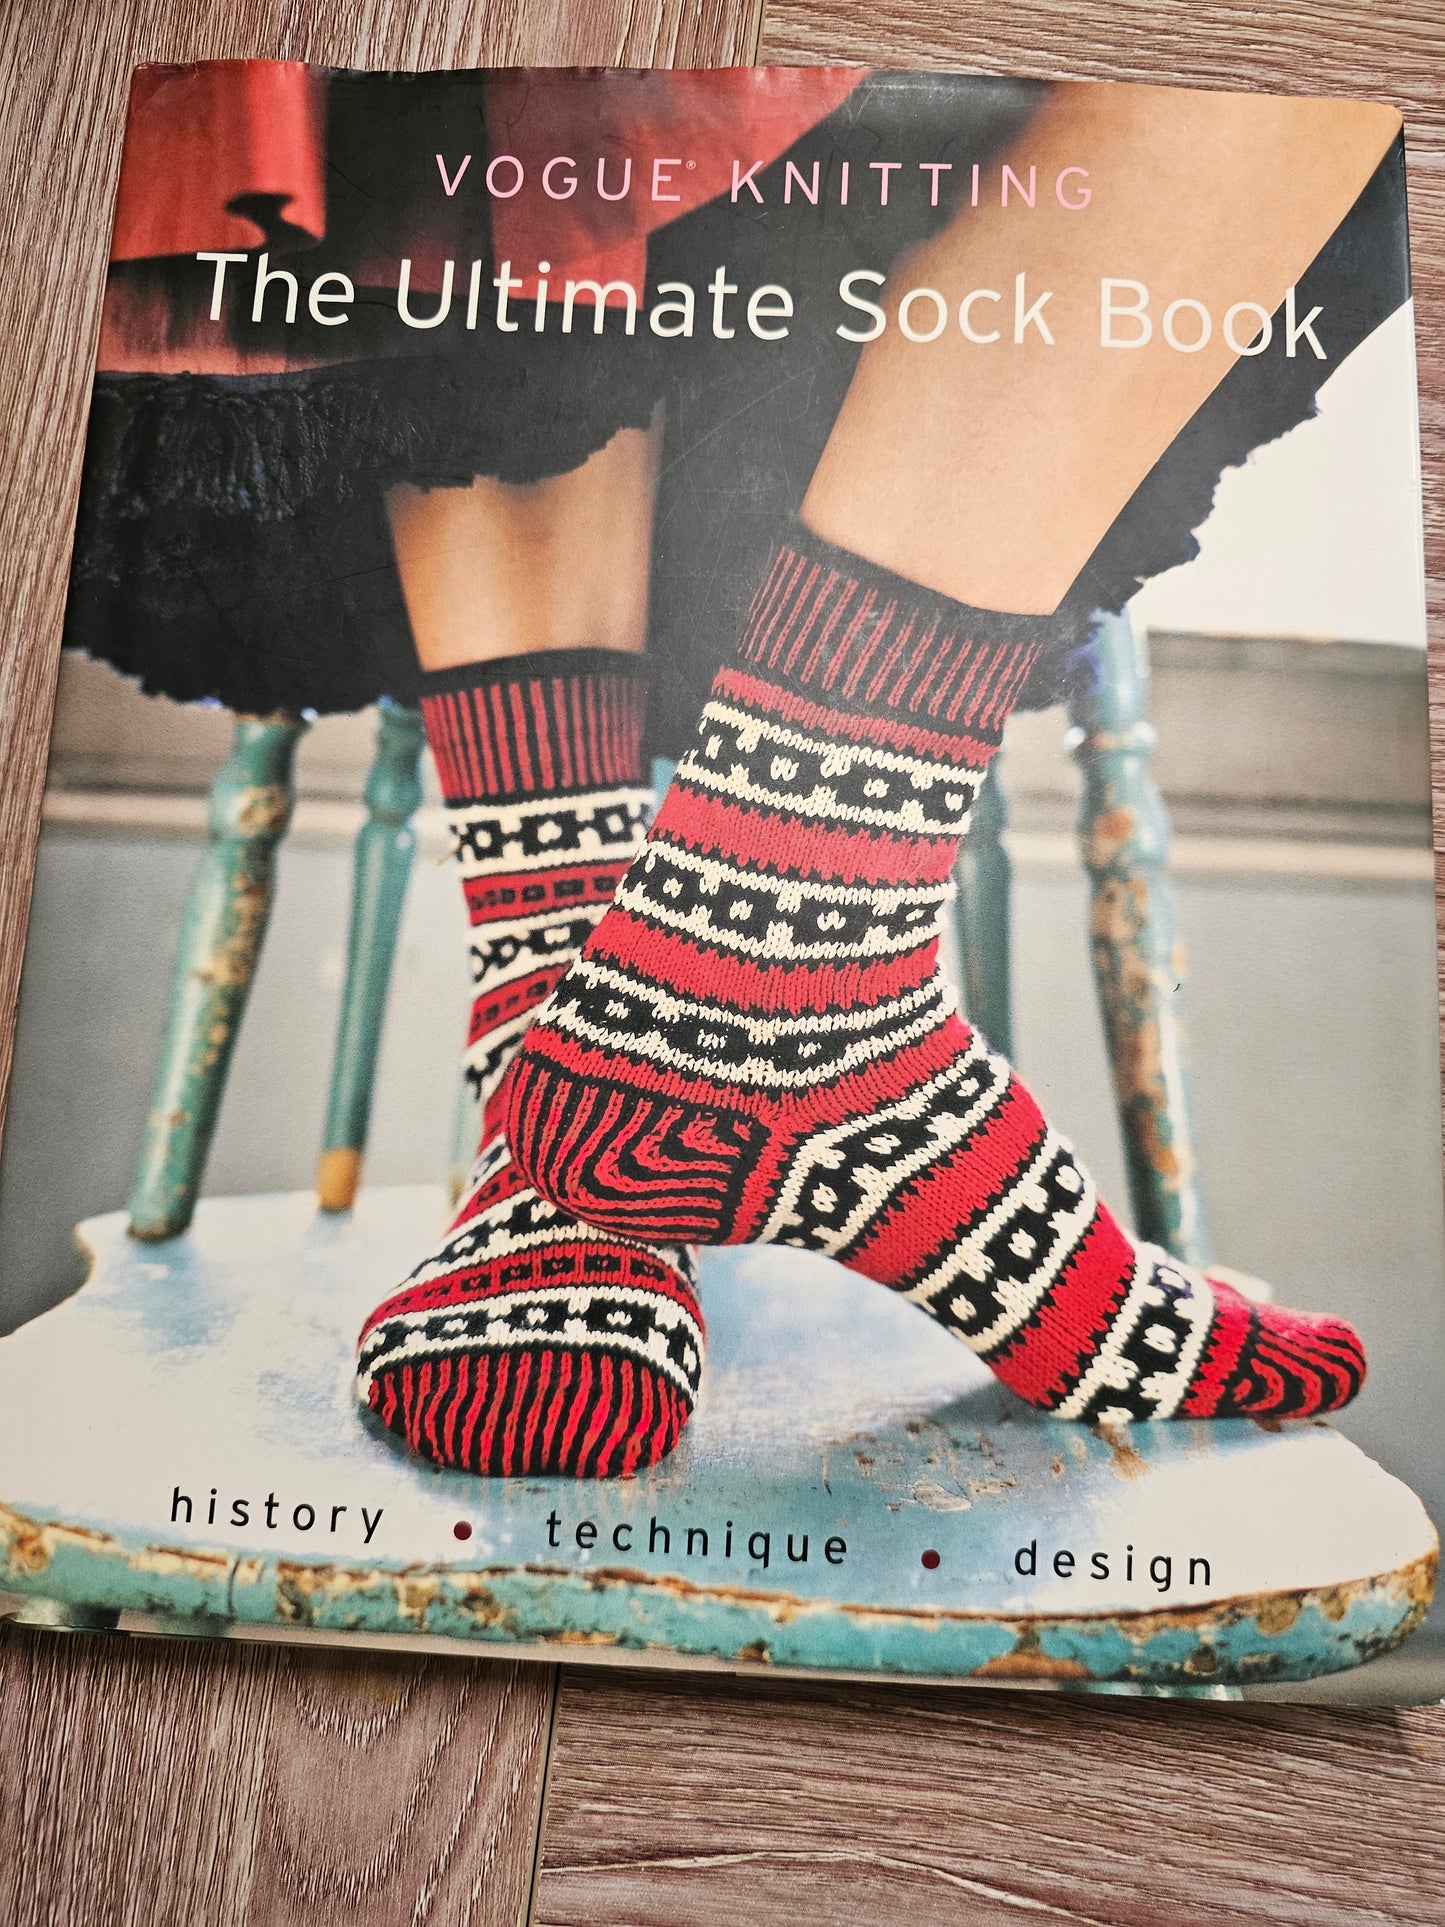 Vogue Knitting "The Ultimate Sock Book" Used